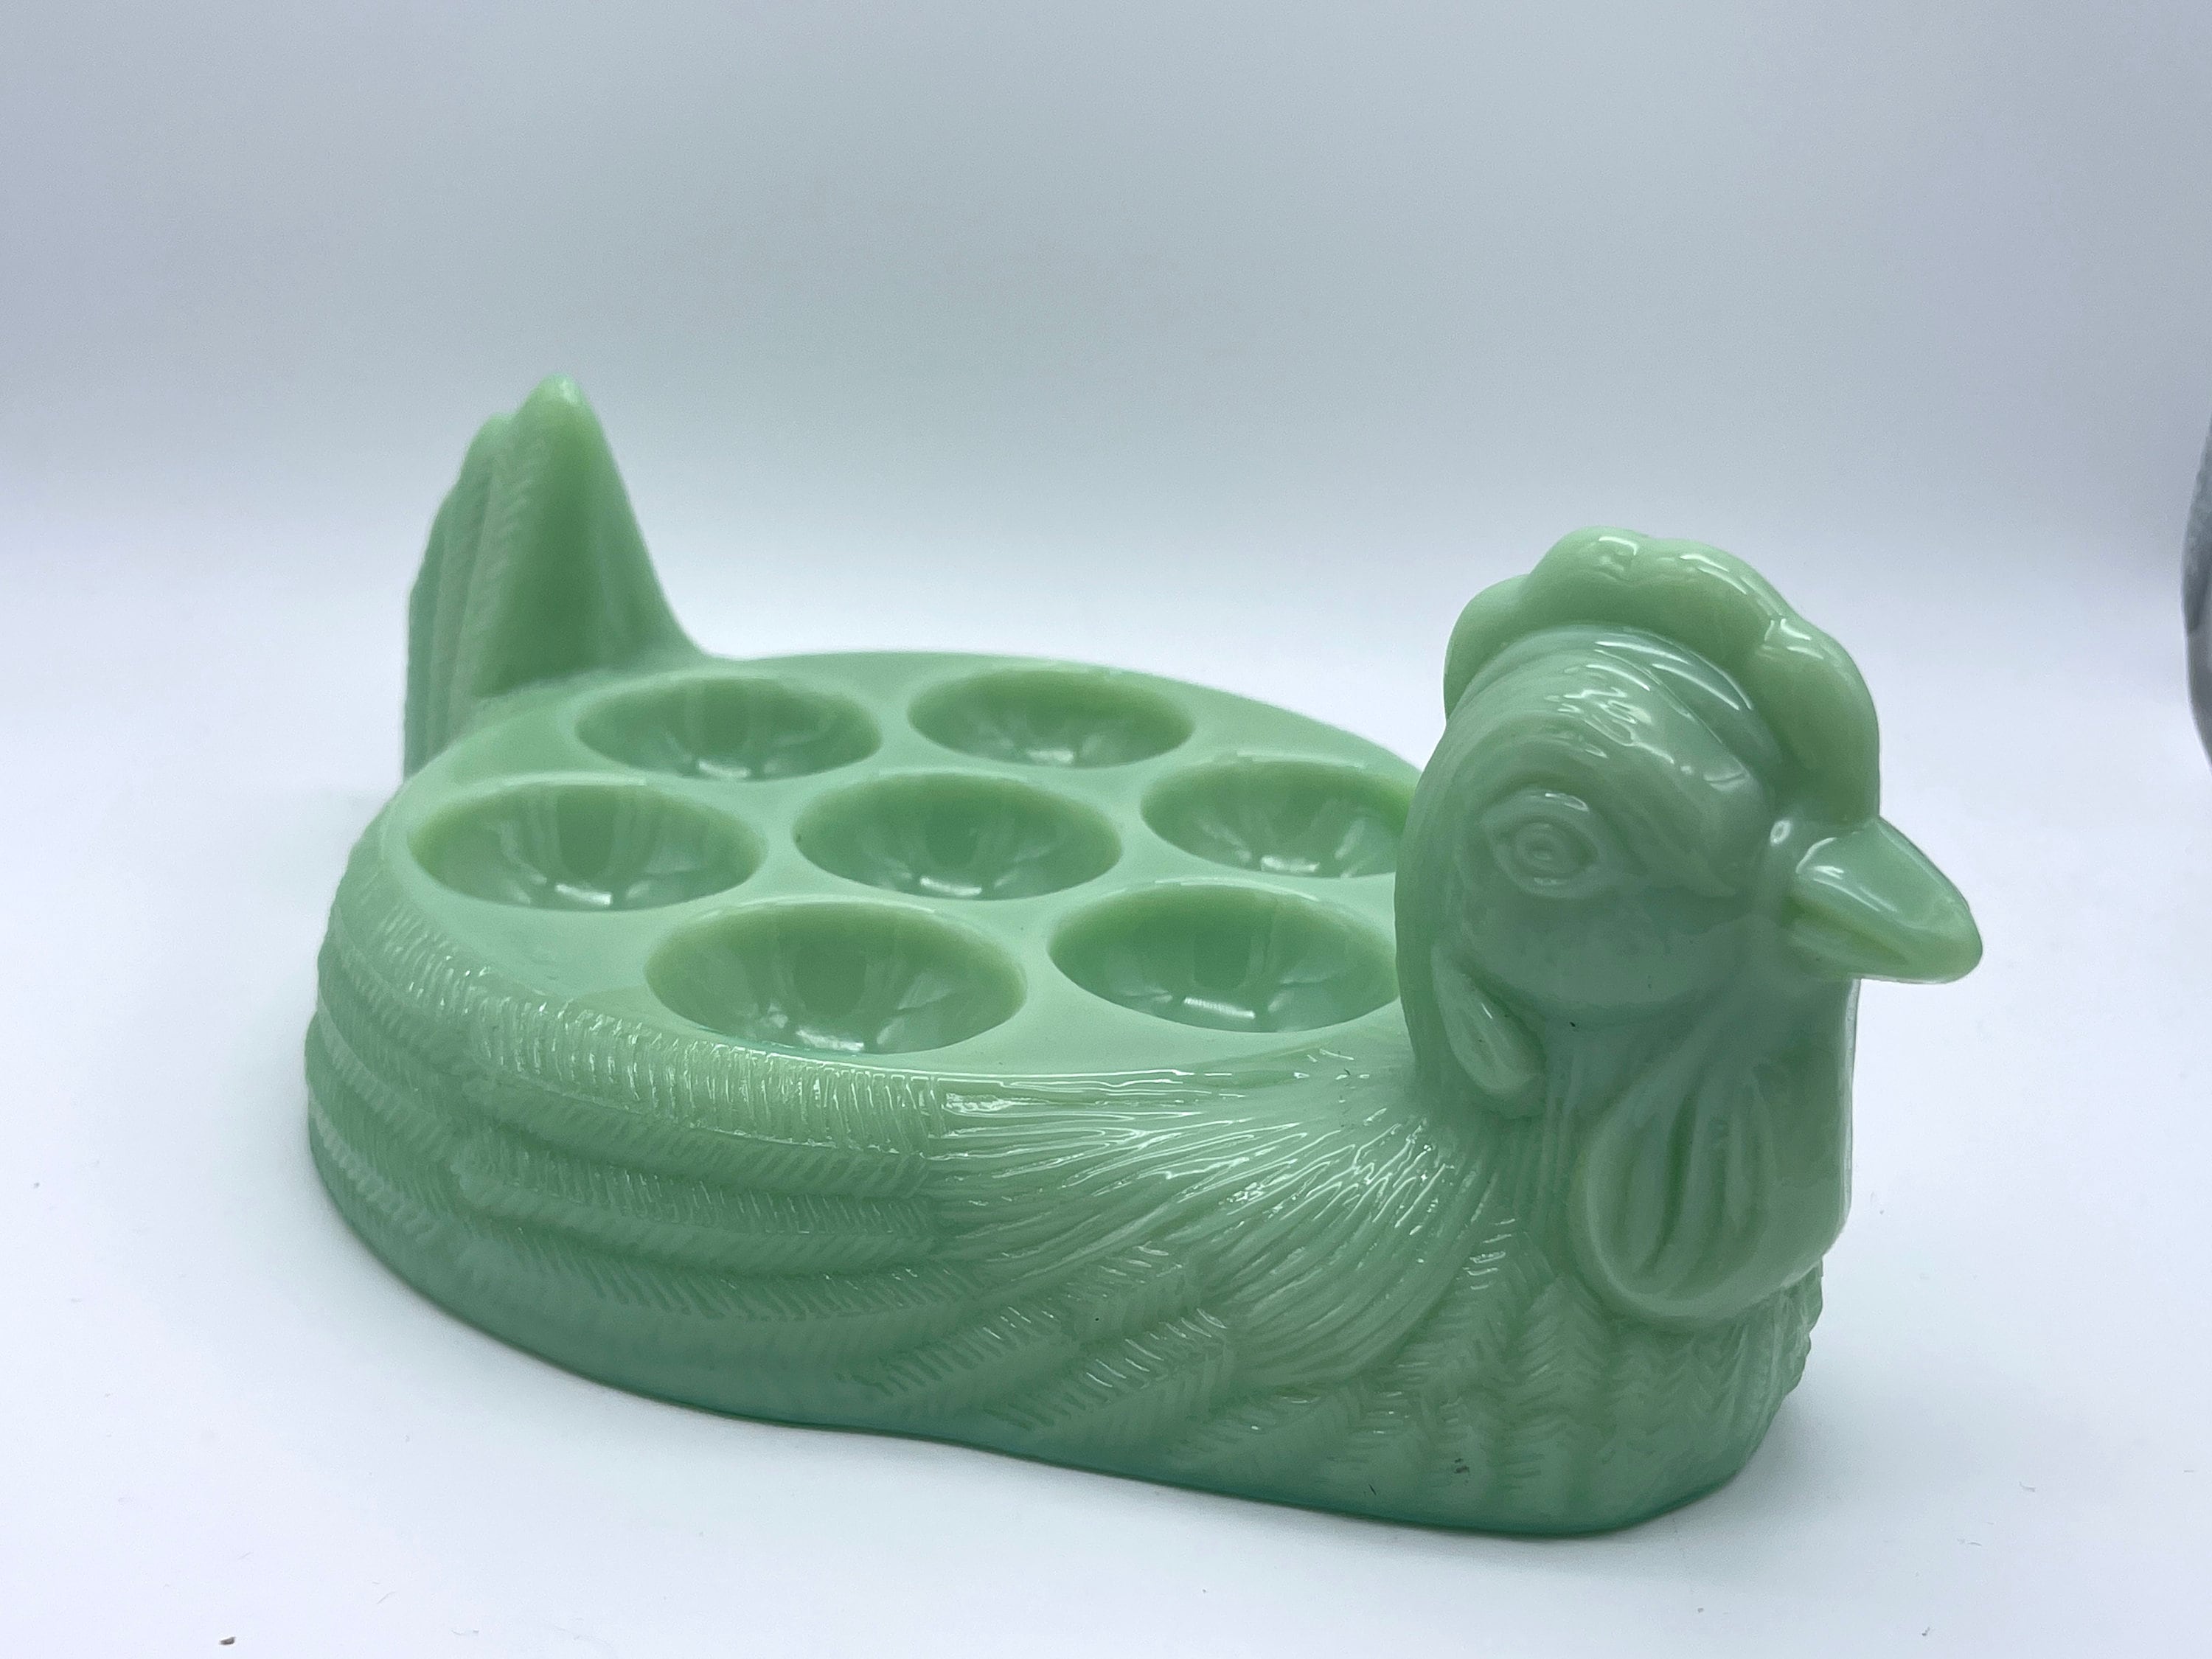 Green Glass Chicken / Hen Egg Holder Serving Dish - Holds Up To 7 Eggs